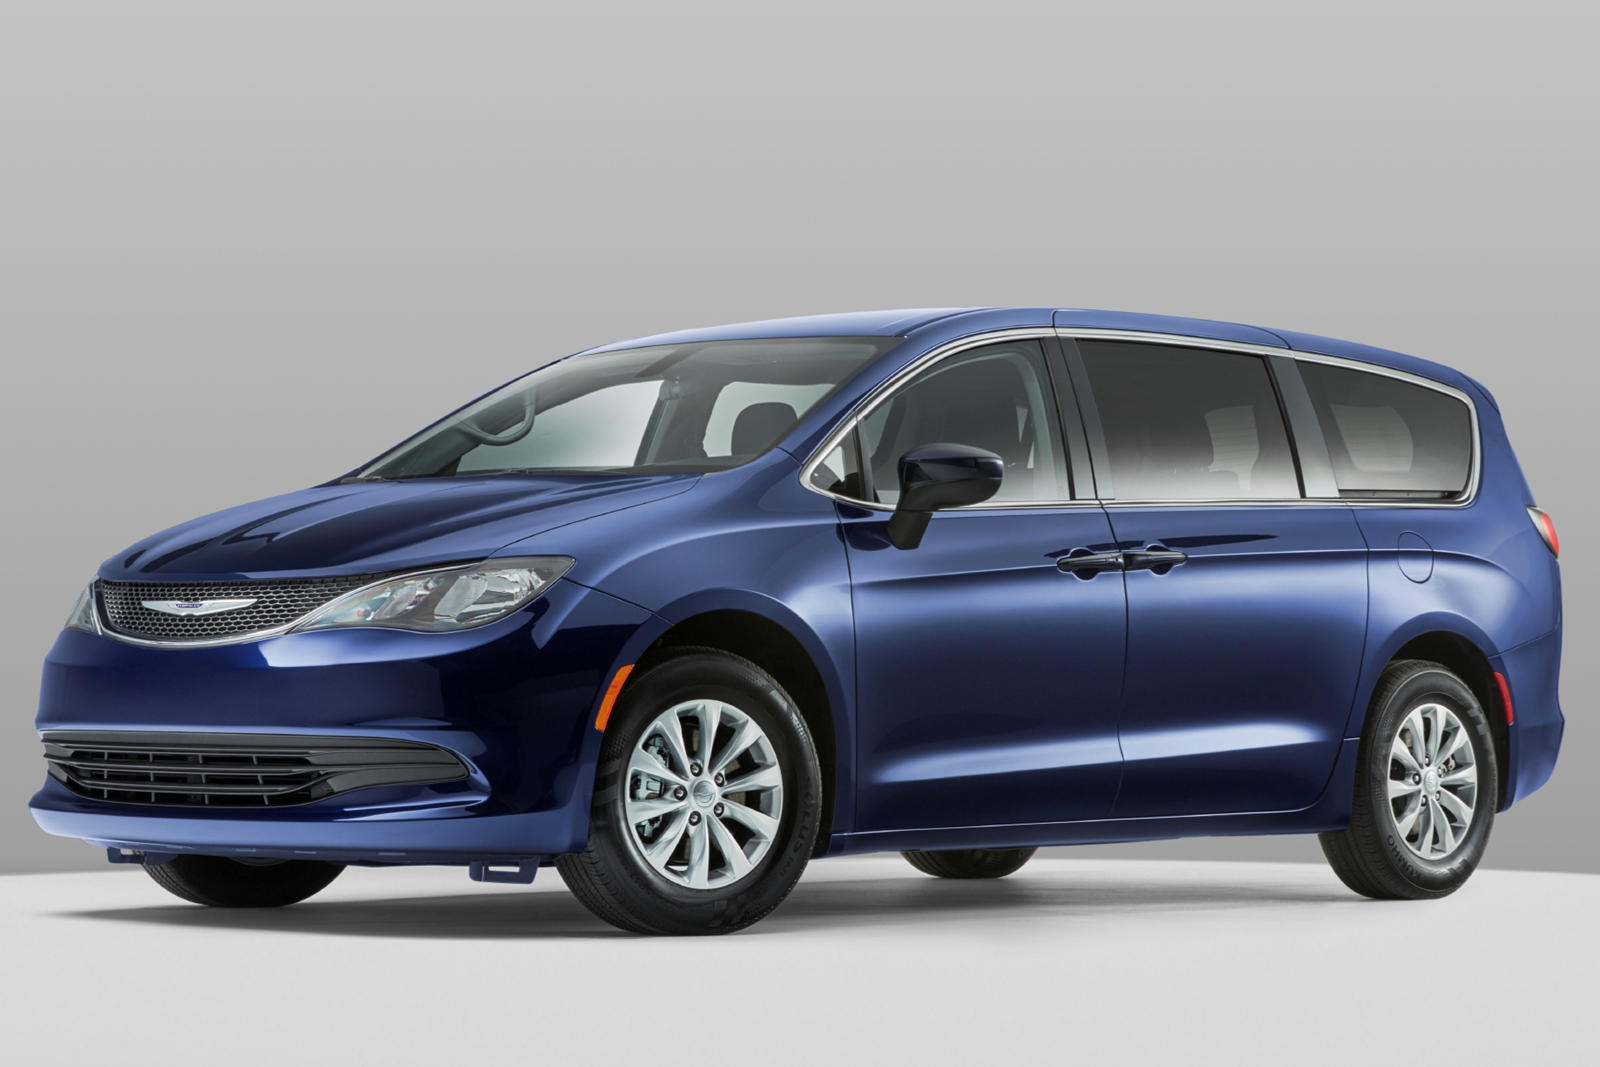 2020 Chrysler Voyager Review, Trims, Specs, Price, New Interior